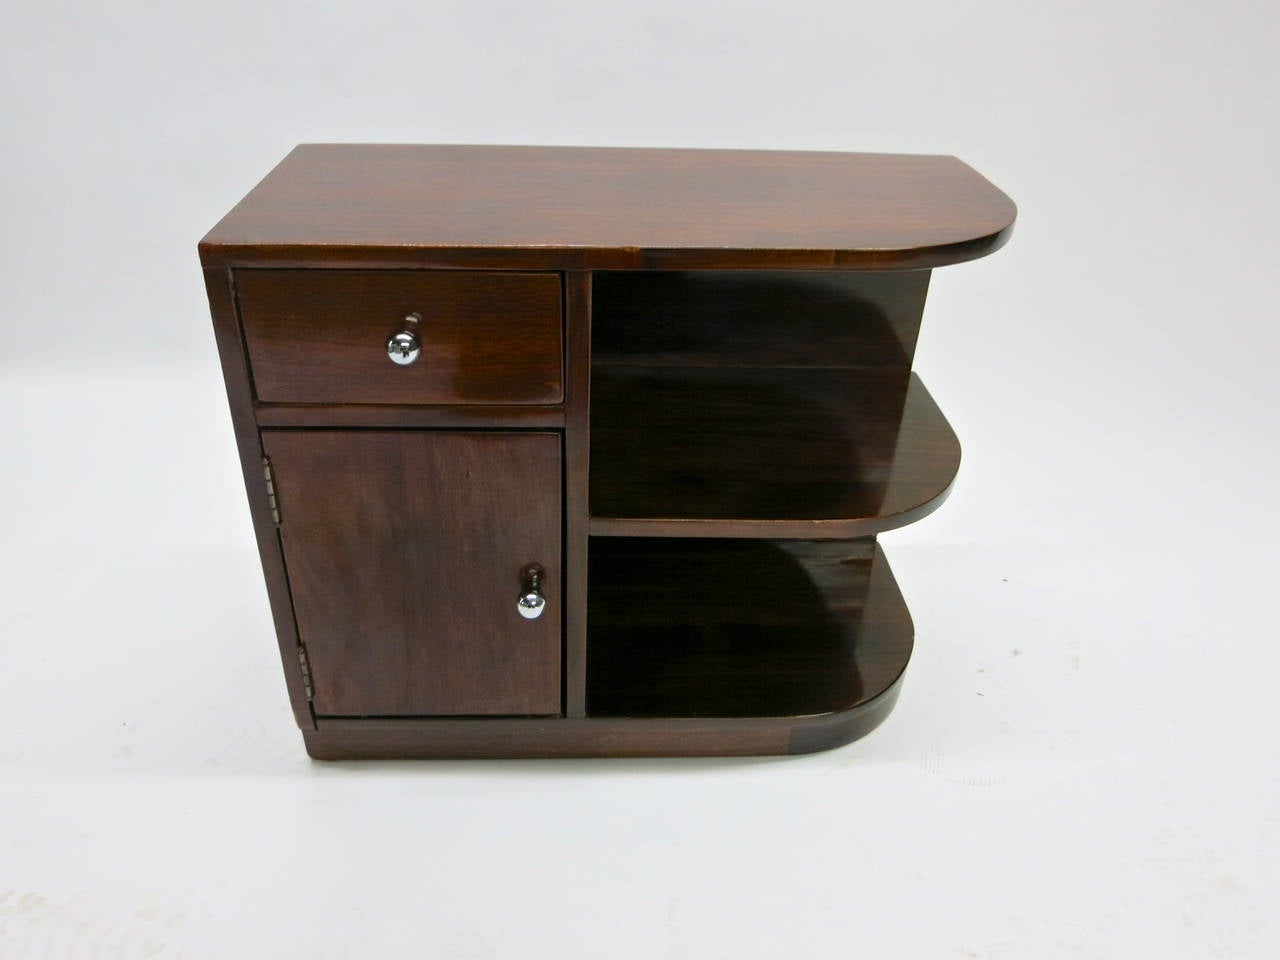 Side or low nightstand table in lacquered wood, deco/post deco in shape. One side of the table is open and bi-level and the other side has a top draw and a bottom door that opens to store items.